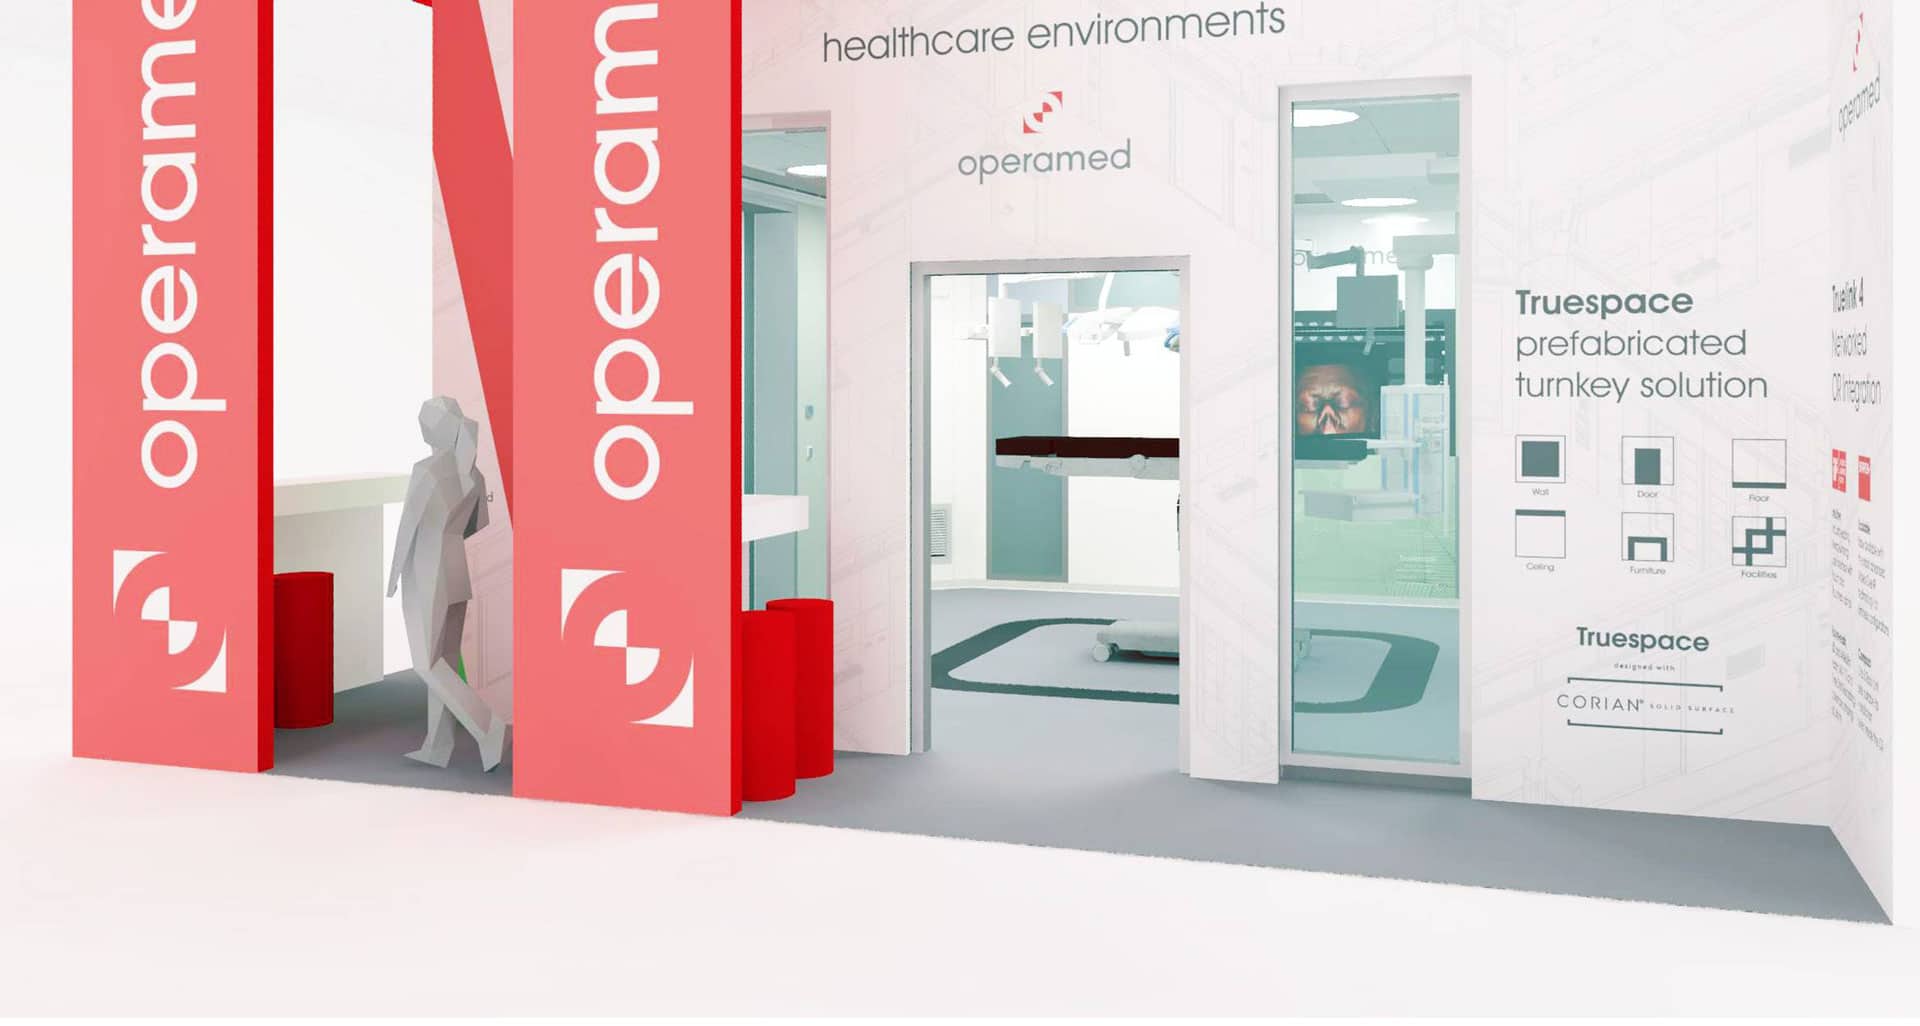 Featured image for “Operamed will be present at Arab Health 2020 exhibition in Dubai”